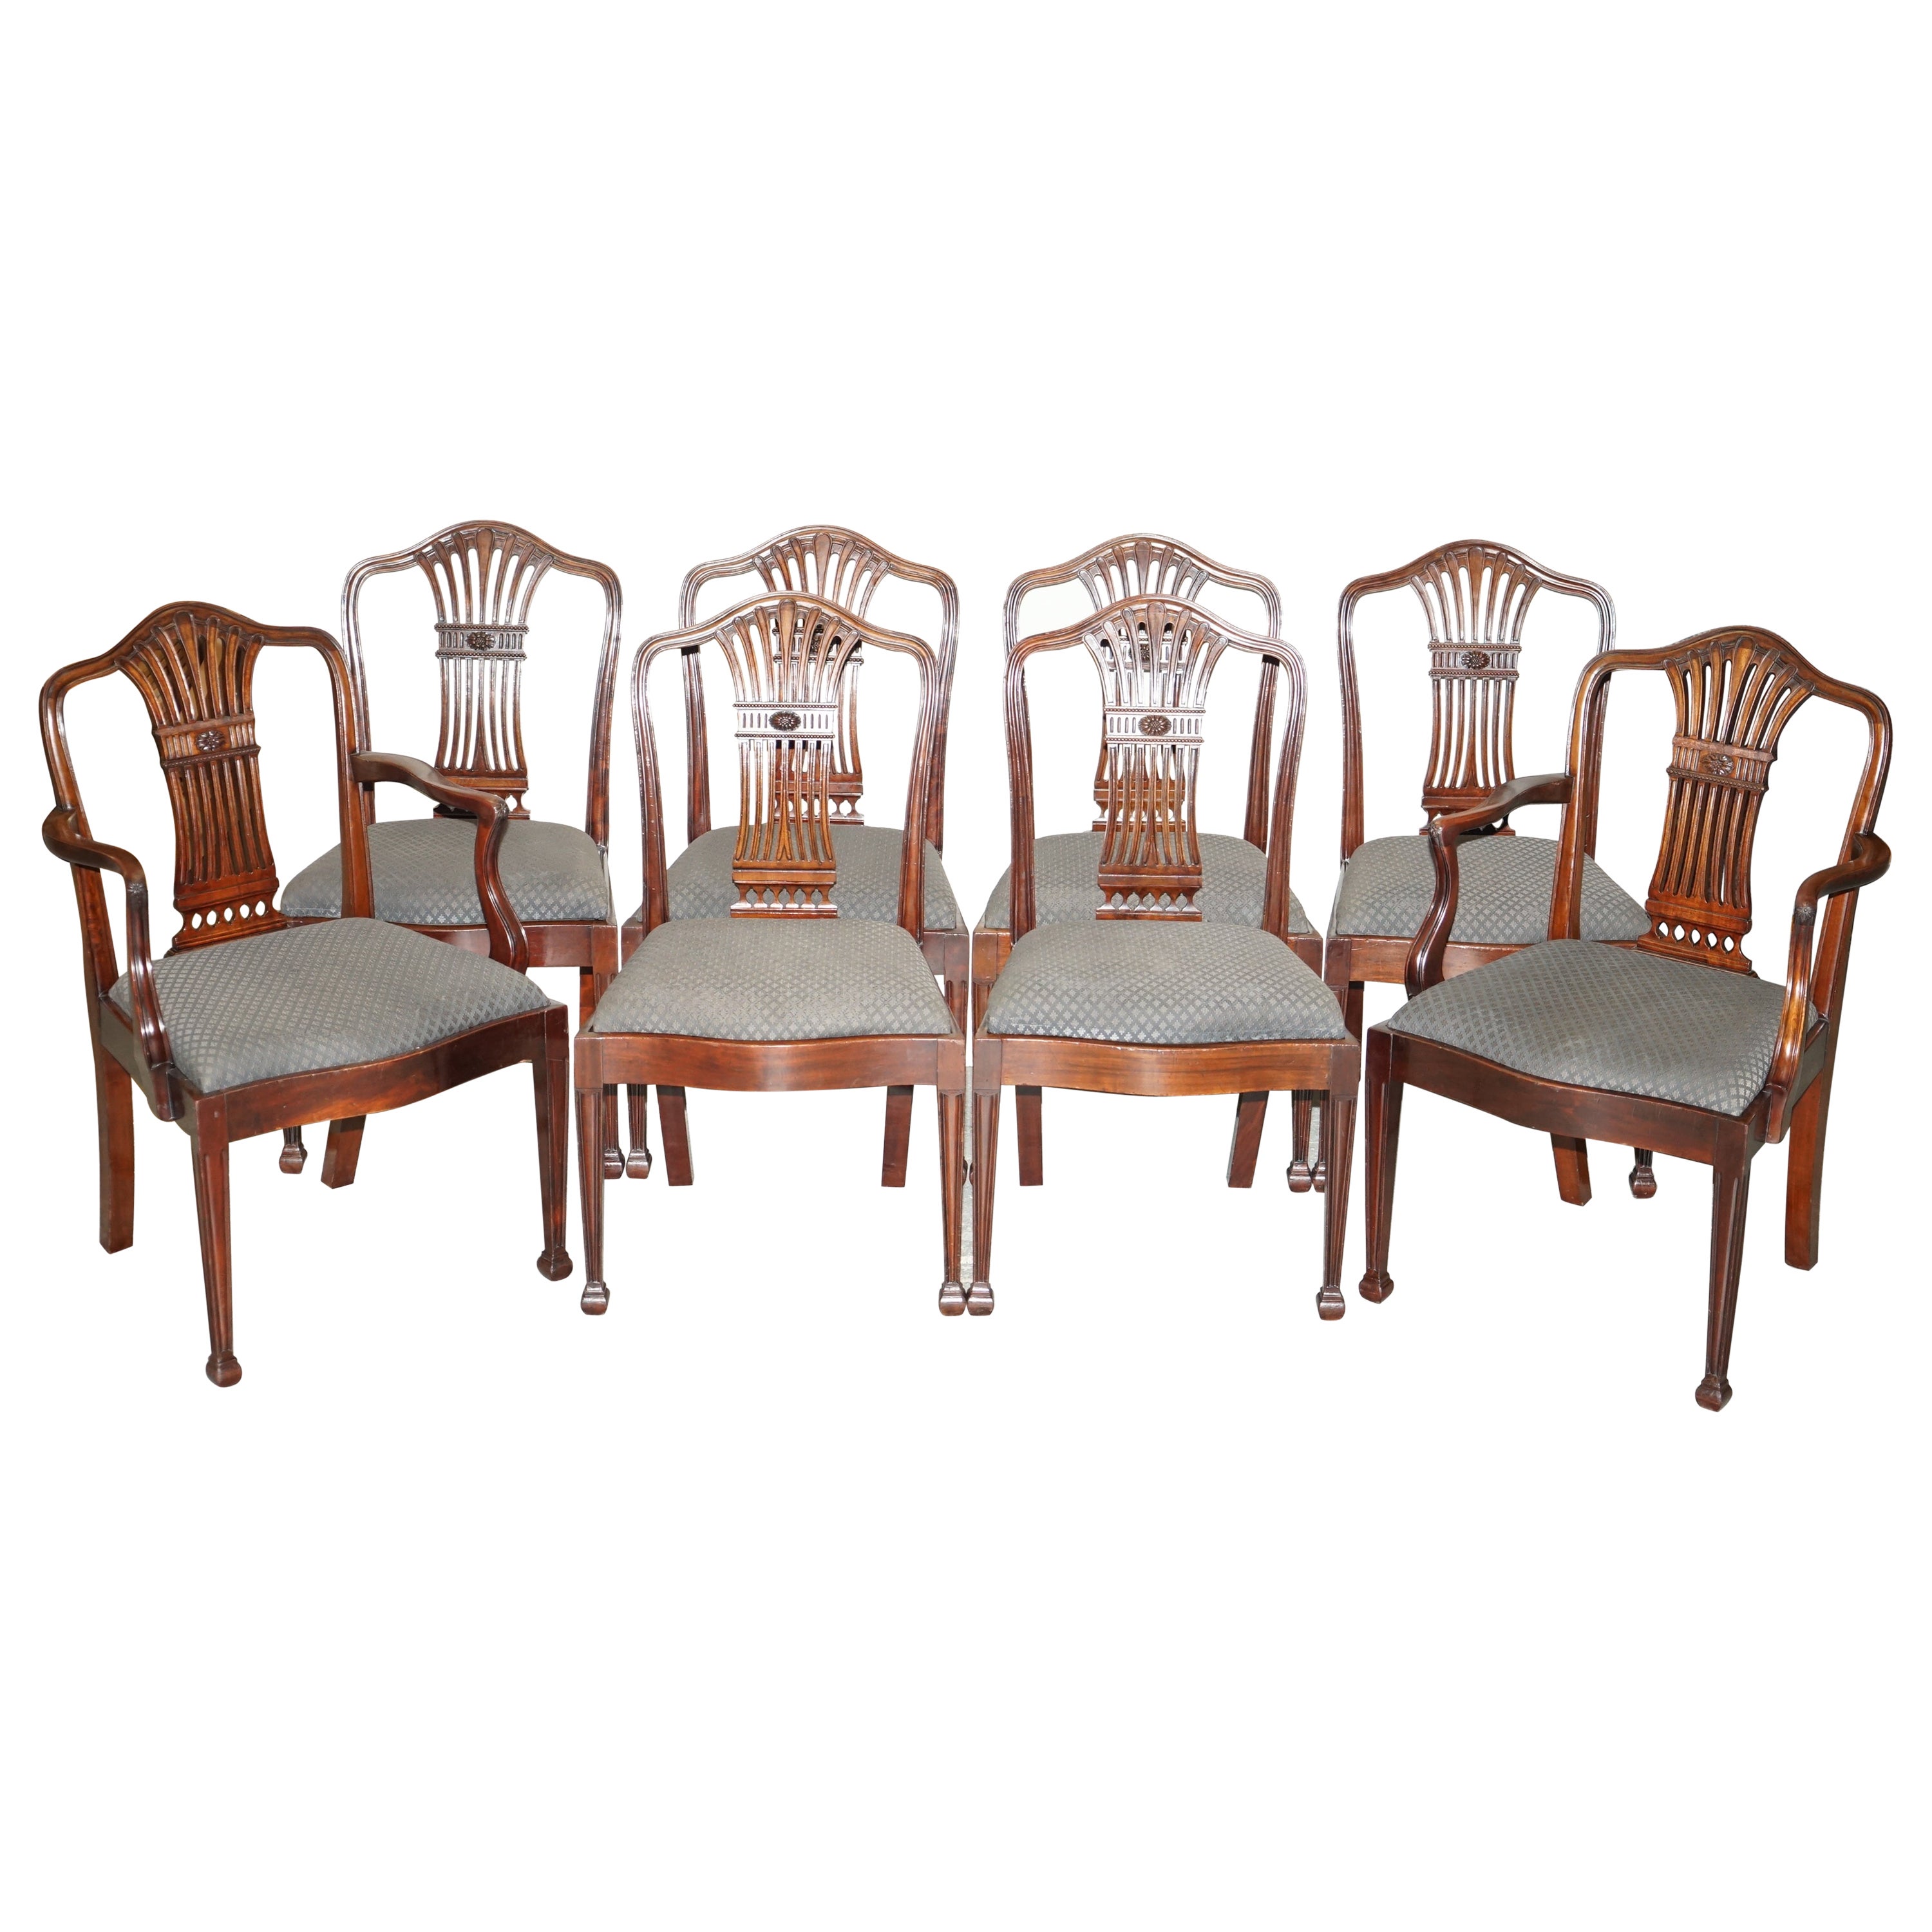 8 ANTIQUE GEORGE HEPPLEWHITE STYLE DINING CHAIRS FROM LADY DIANA'S SPENCER HOUSE im Angebot